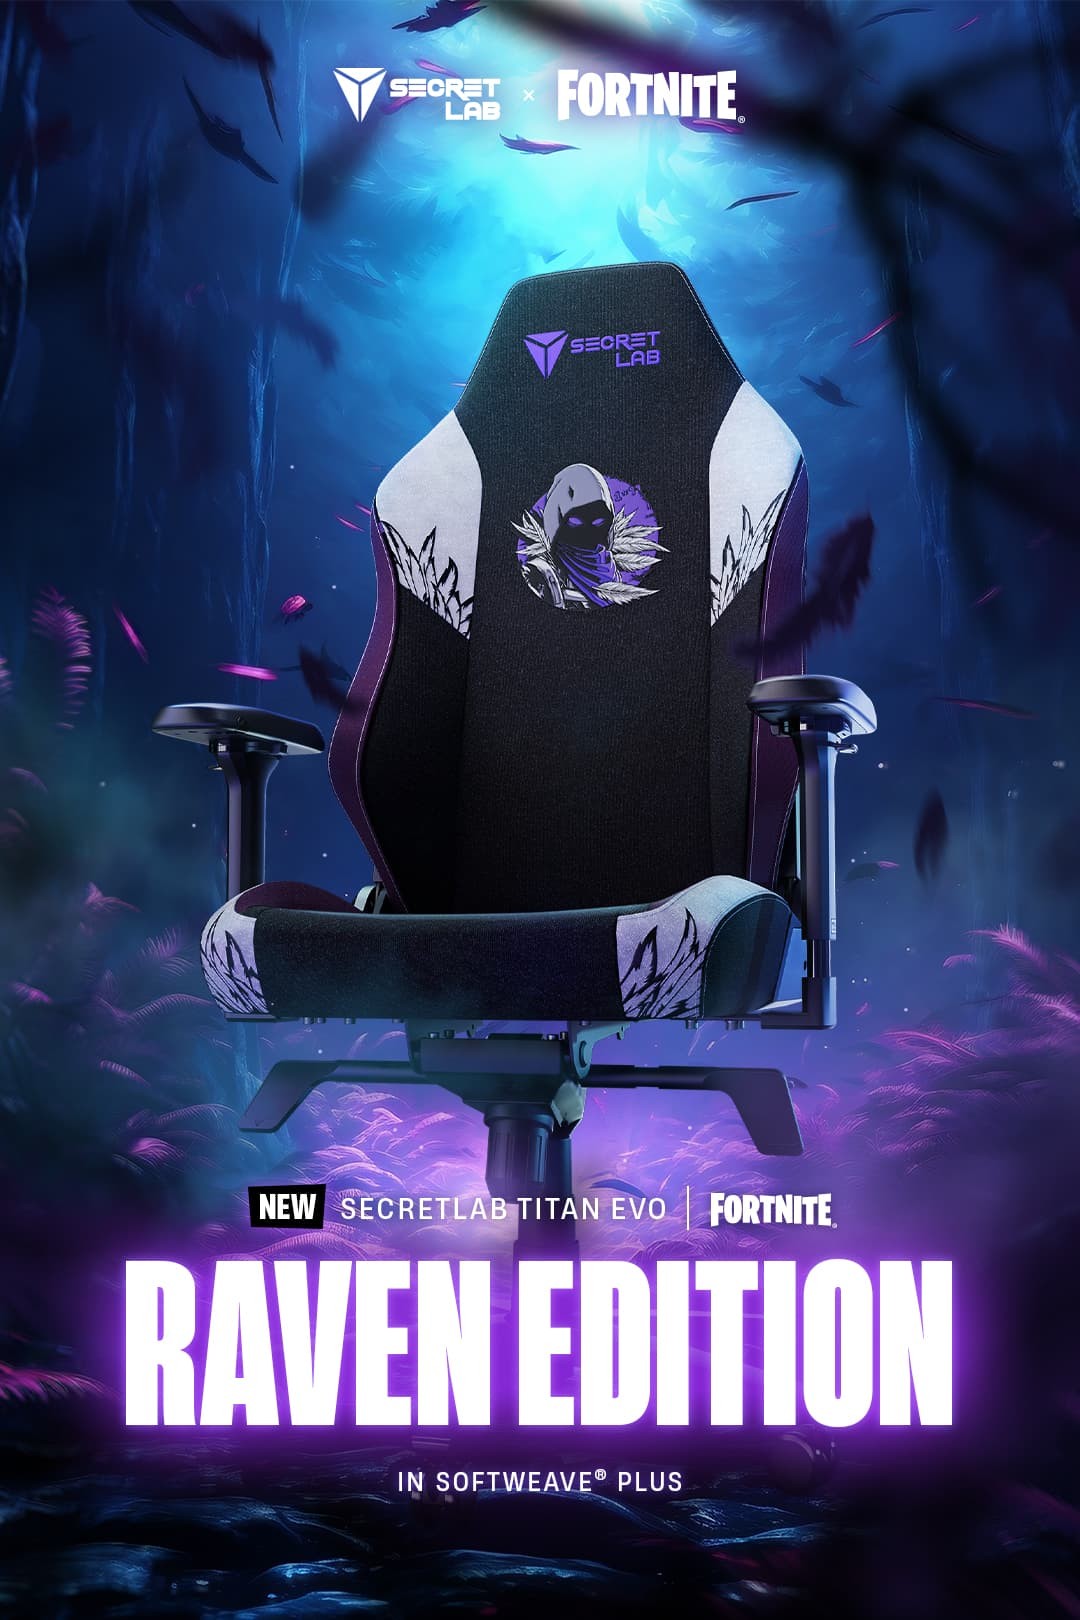 Secretlab introduces a new addition to the Fortnite collection with the Titan Evo Raven Edition chair